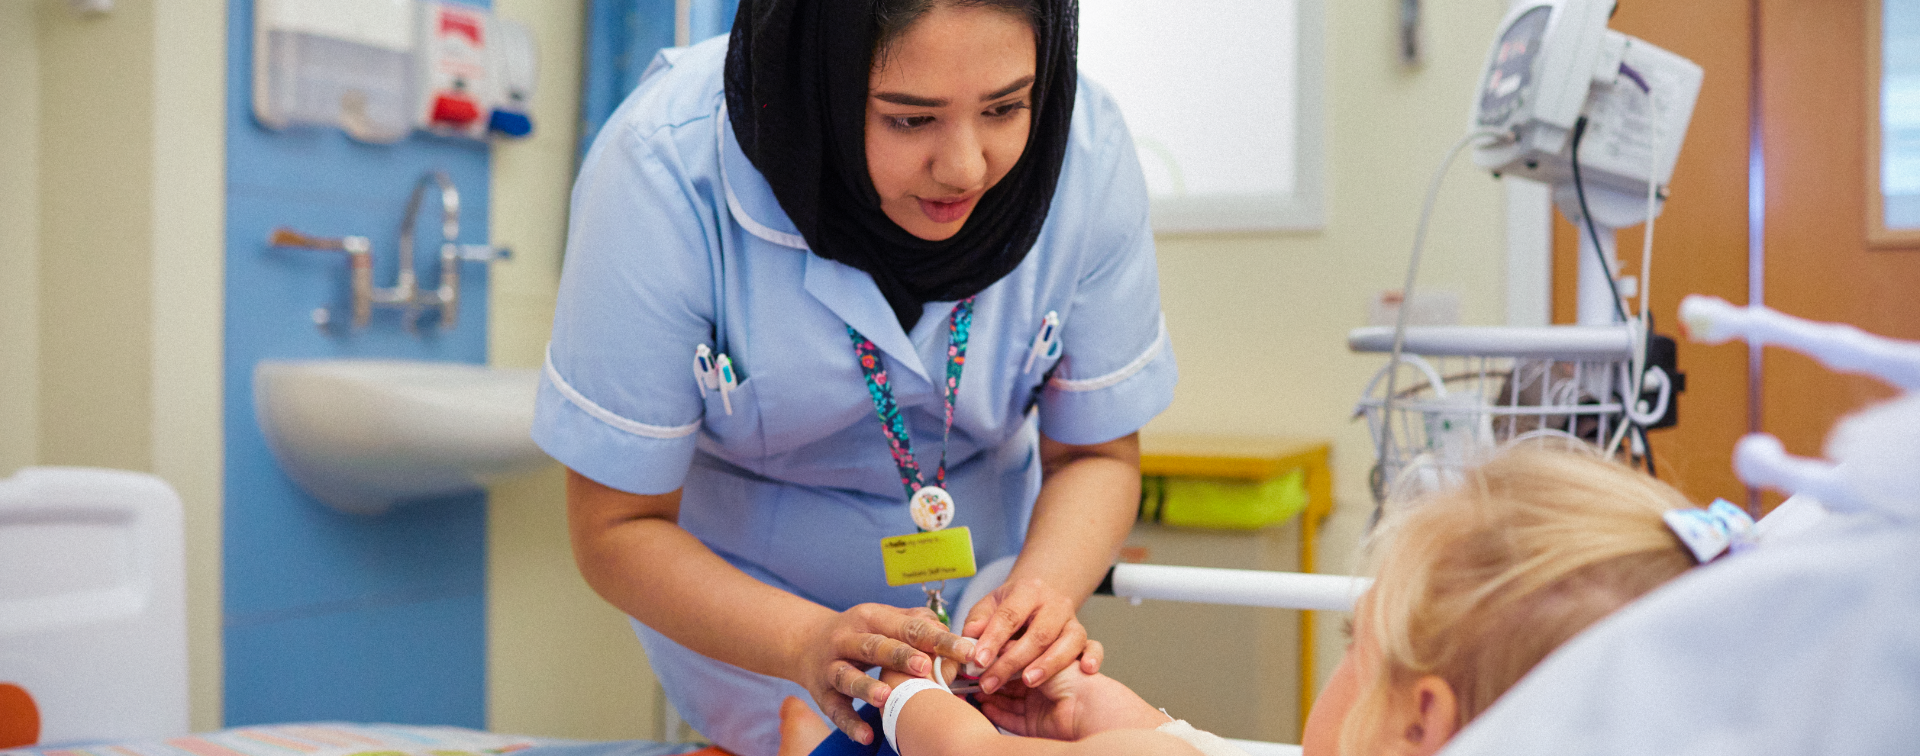 The Caring Concept in Nursing